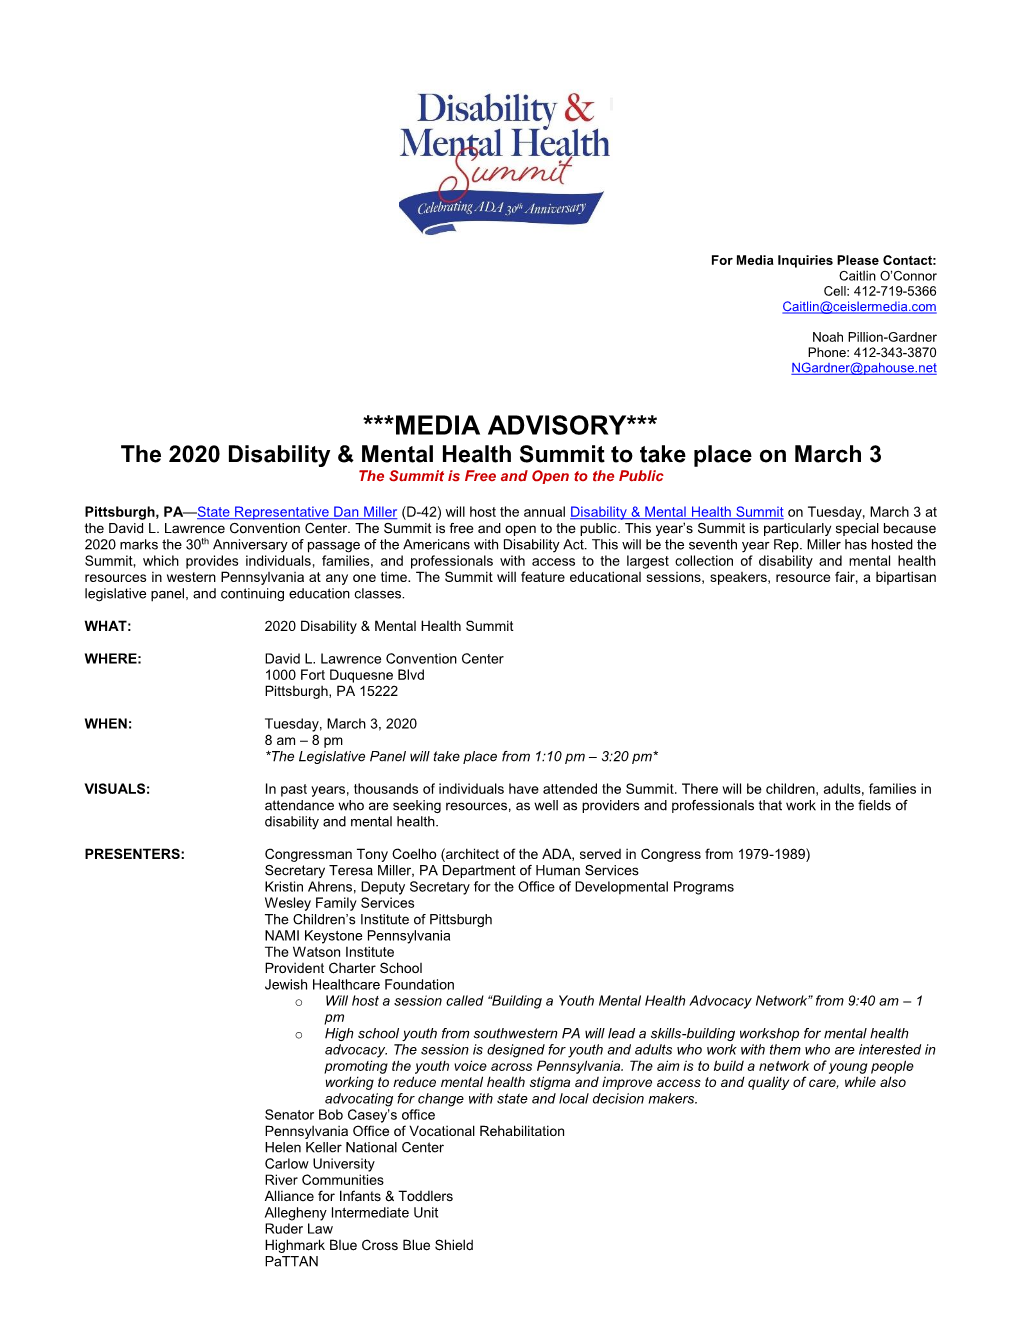 MEDIA ADVISORY*** the 2020 Disability & Mental Health Summit to Take Place on March 3 the Summit Is Free and Open to the Public